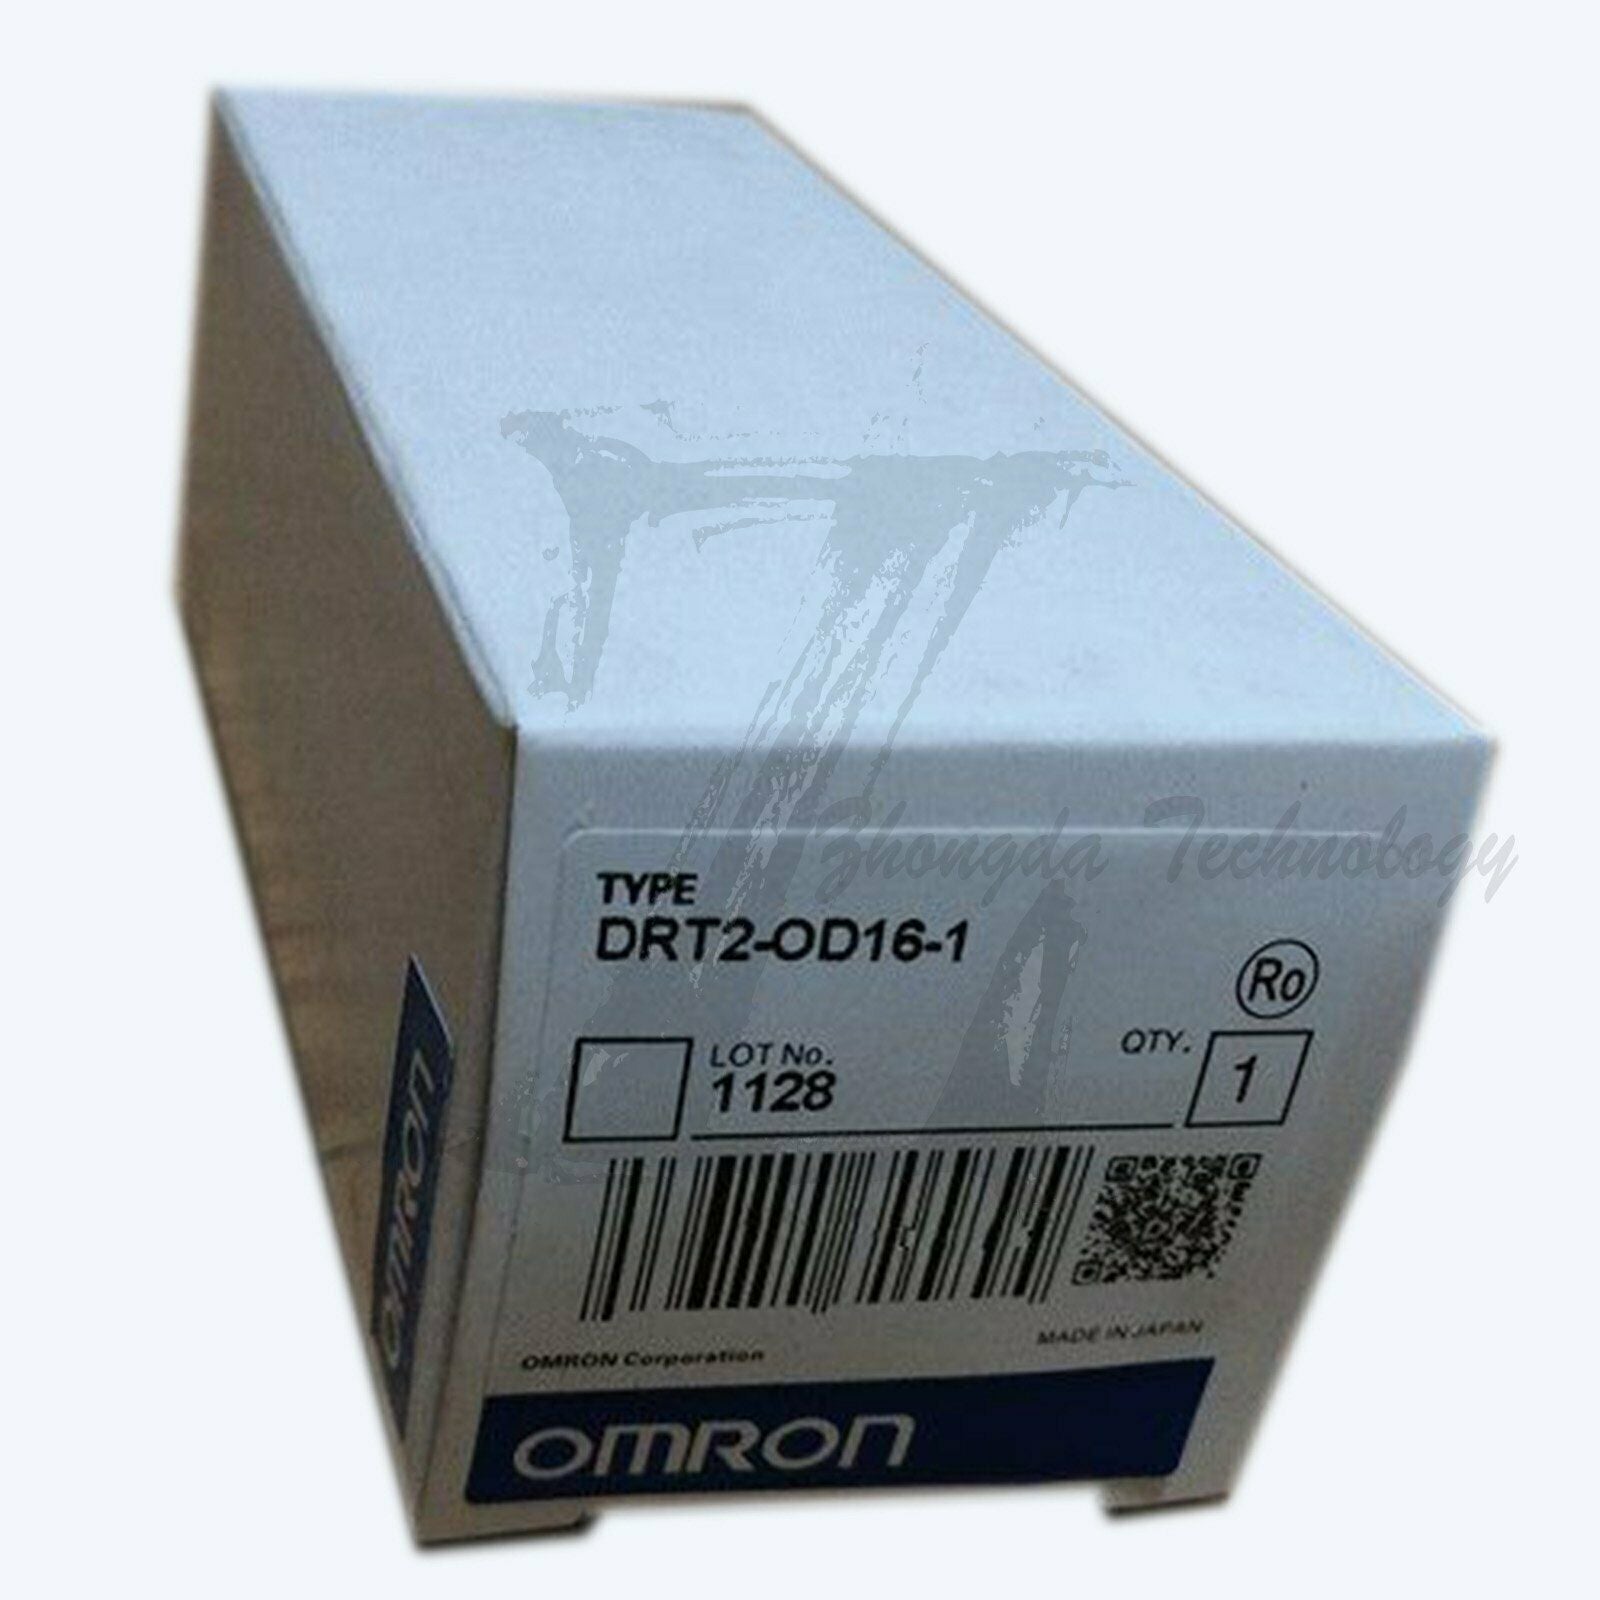 1pc new Omron DRT2-OD16-1 module one year warranty KOEED 101-200, 80%, import_2020_10_10_031751, Omron, Other